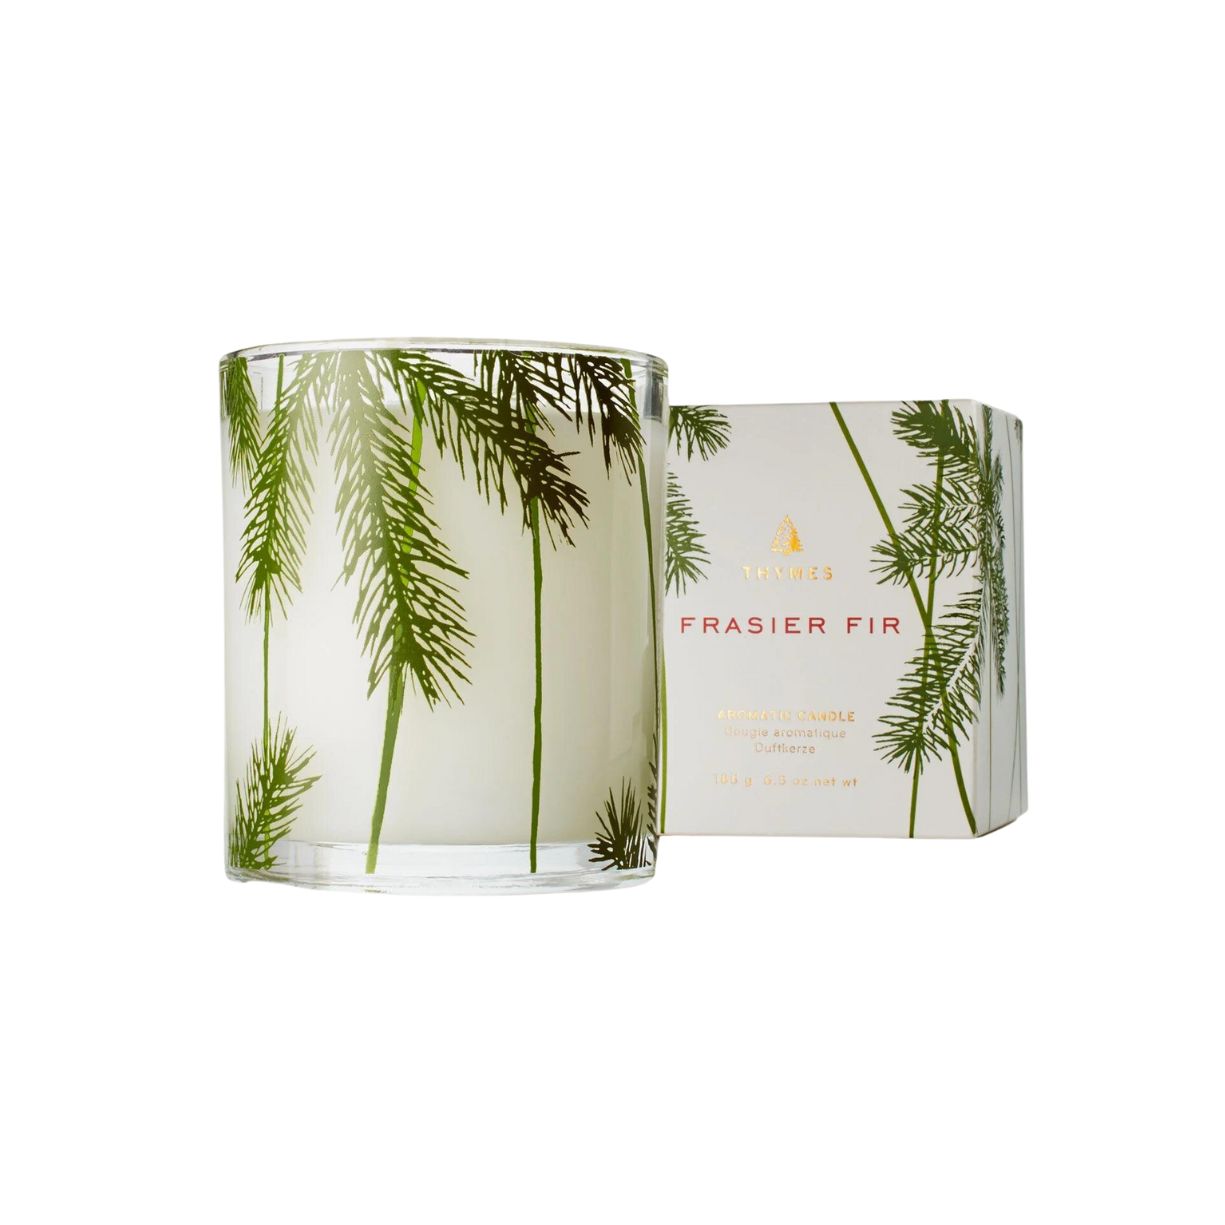 Frasier Fir Pine Needle Poured Candle